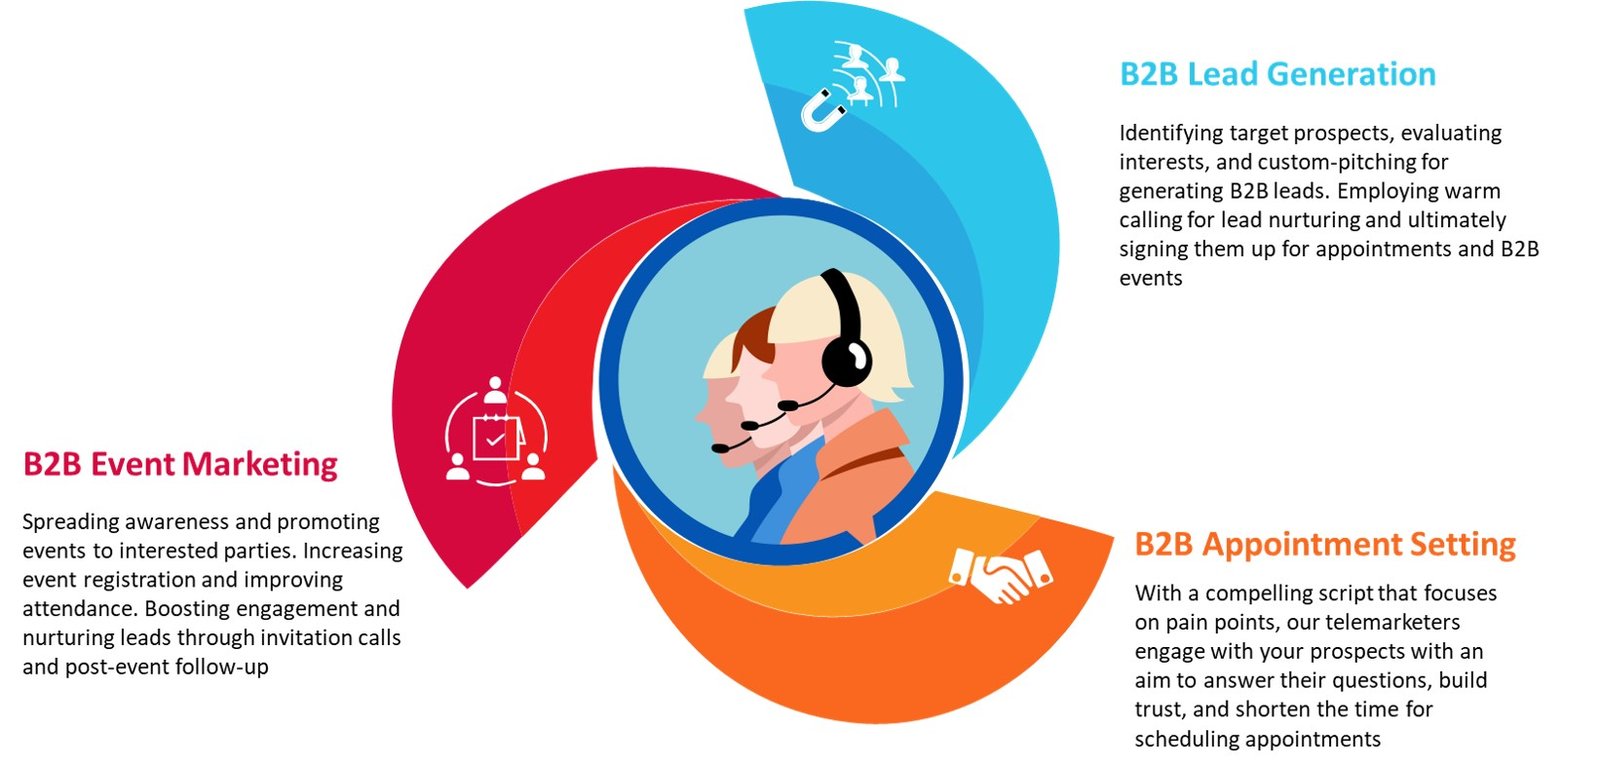 Multi-tiered B2B telemarketing support for